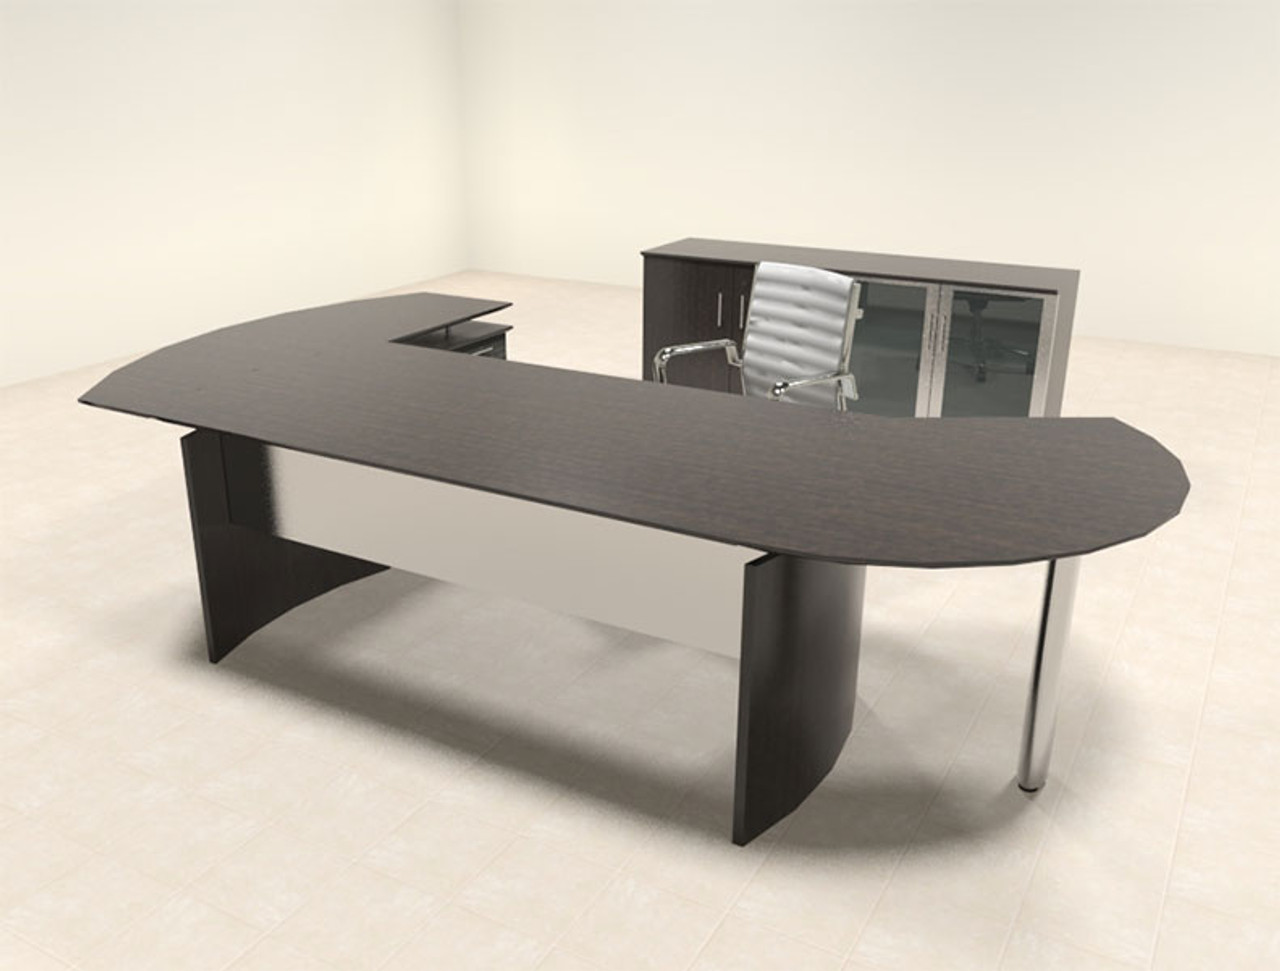 4pc Modern Contemporary L Shaped Executive Office Desk Set, #MT-MED-O12